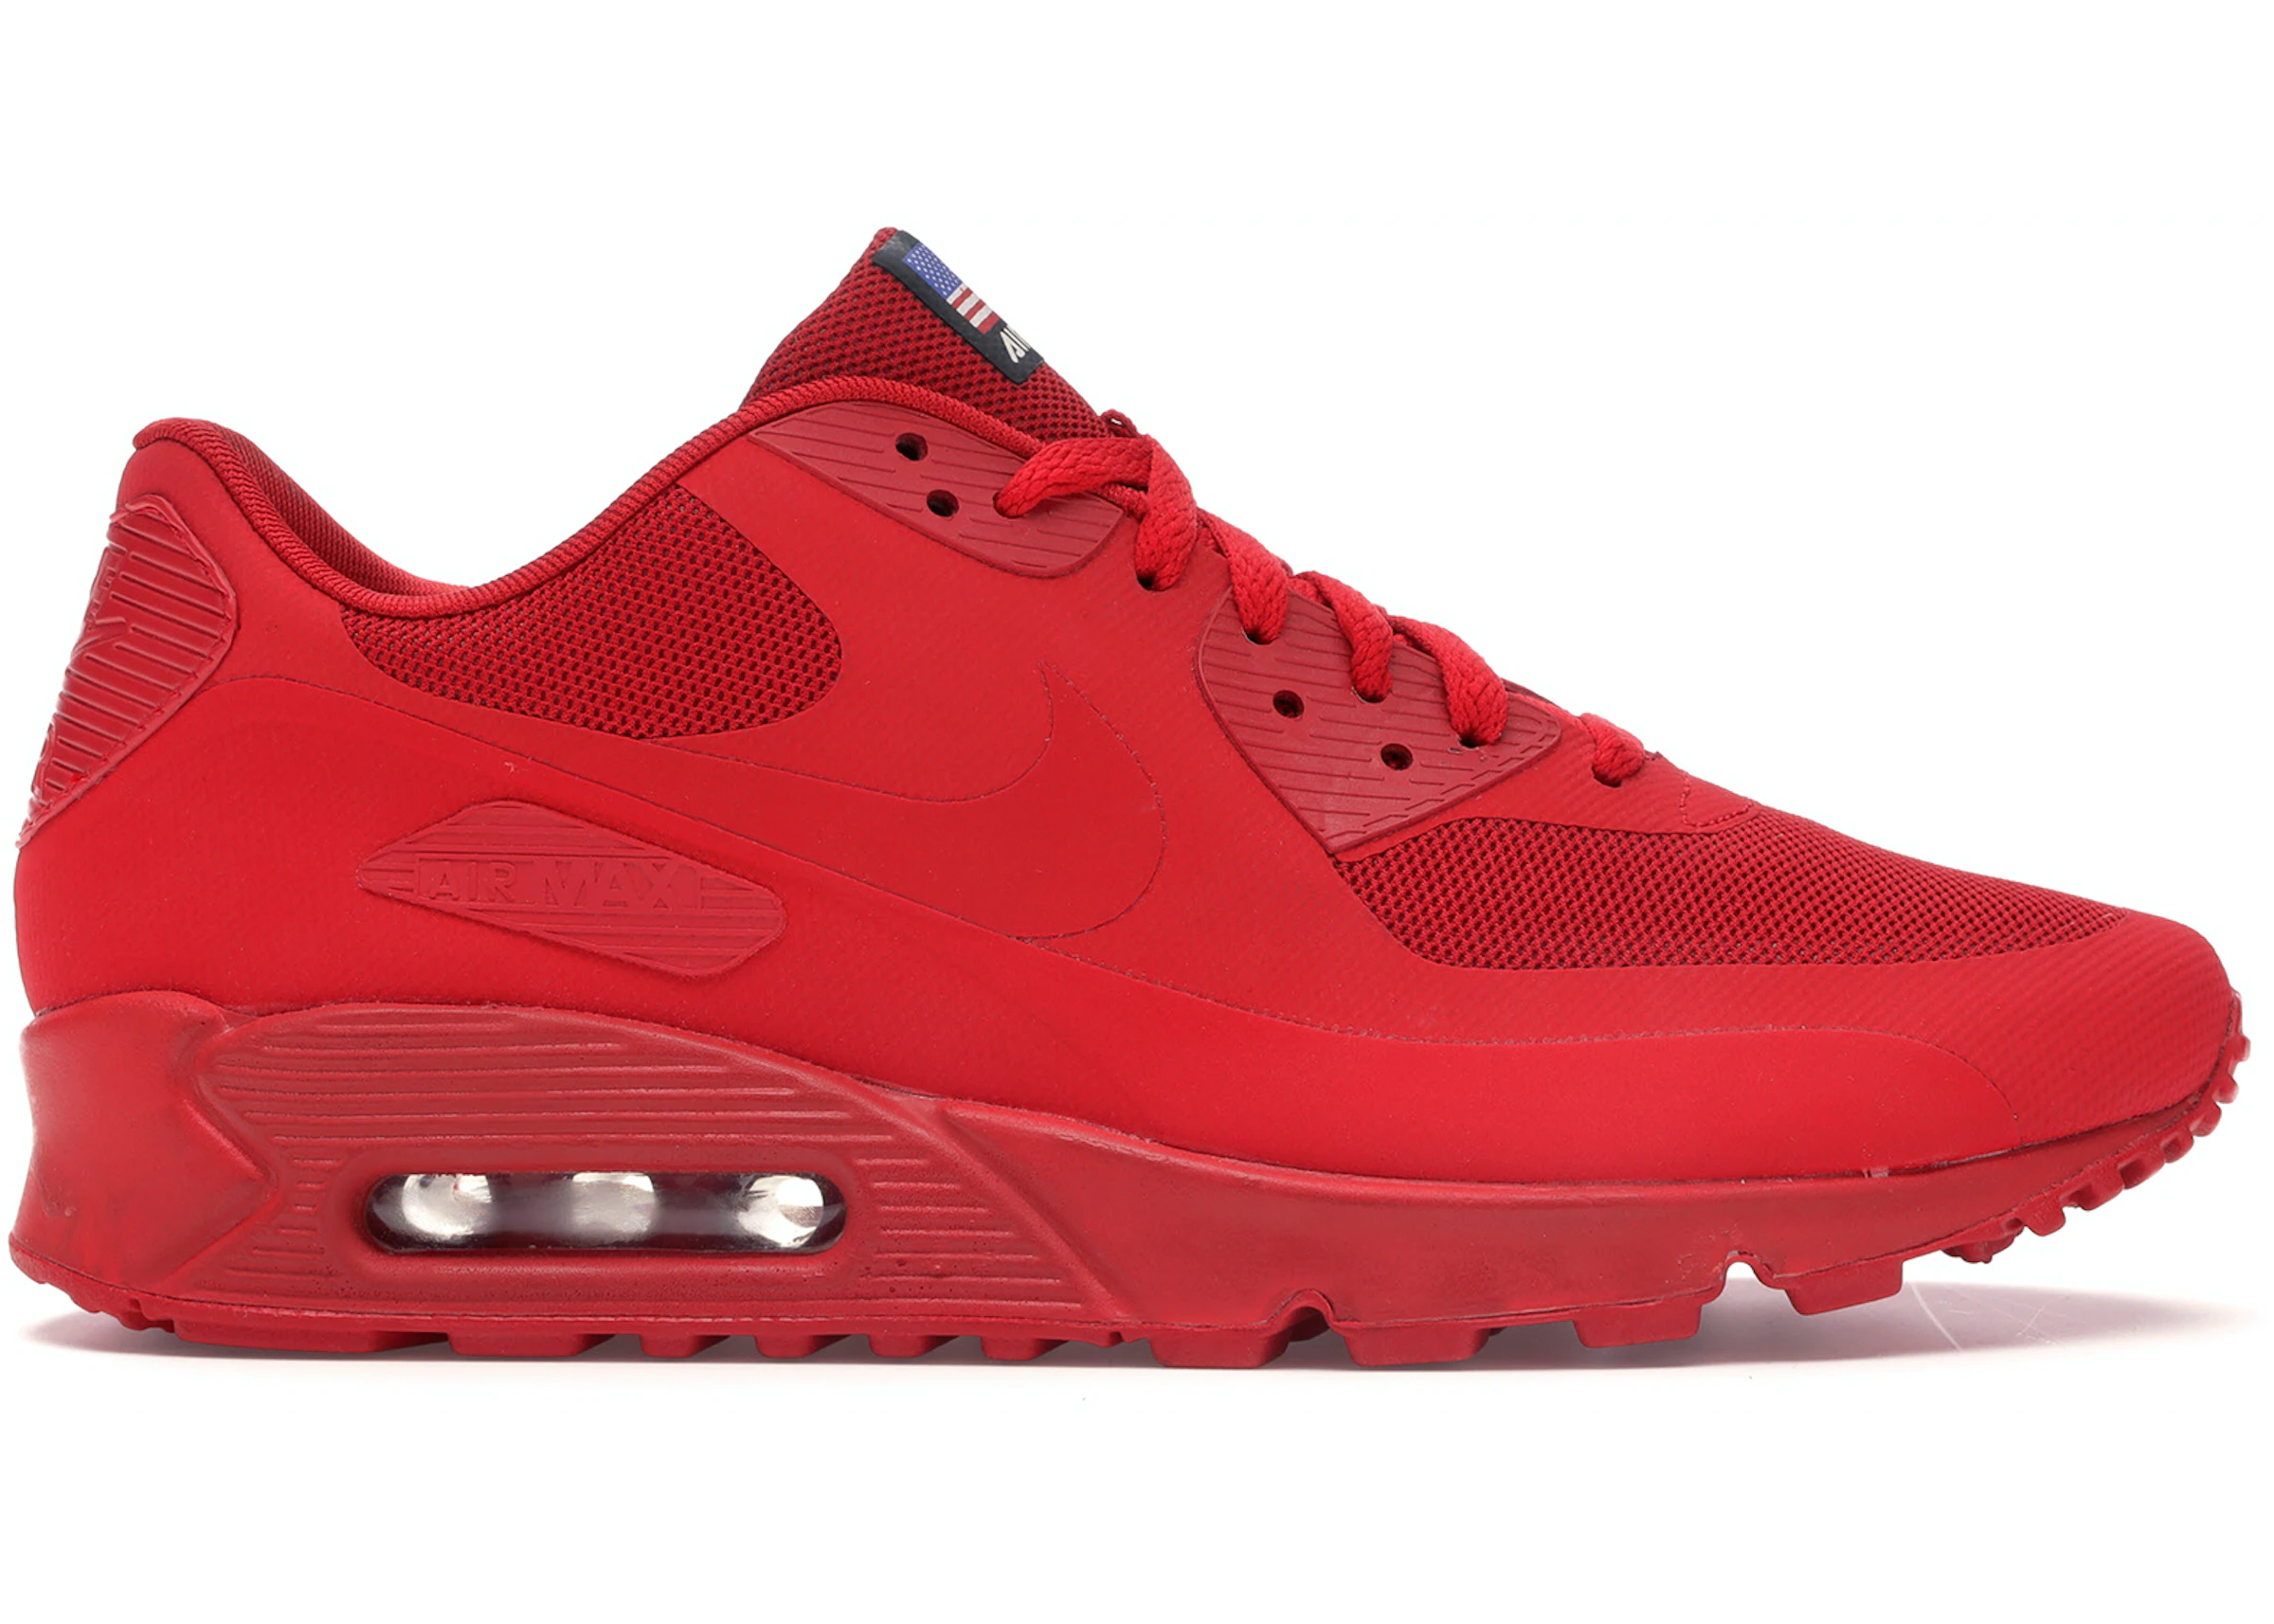 Incomodidad atributo segmento Nike Air Max 90 Hyperfuse Independence Day Red - 613841-660 - ES